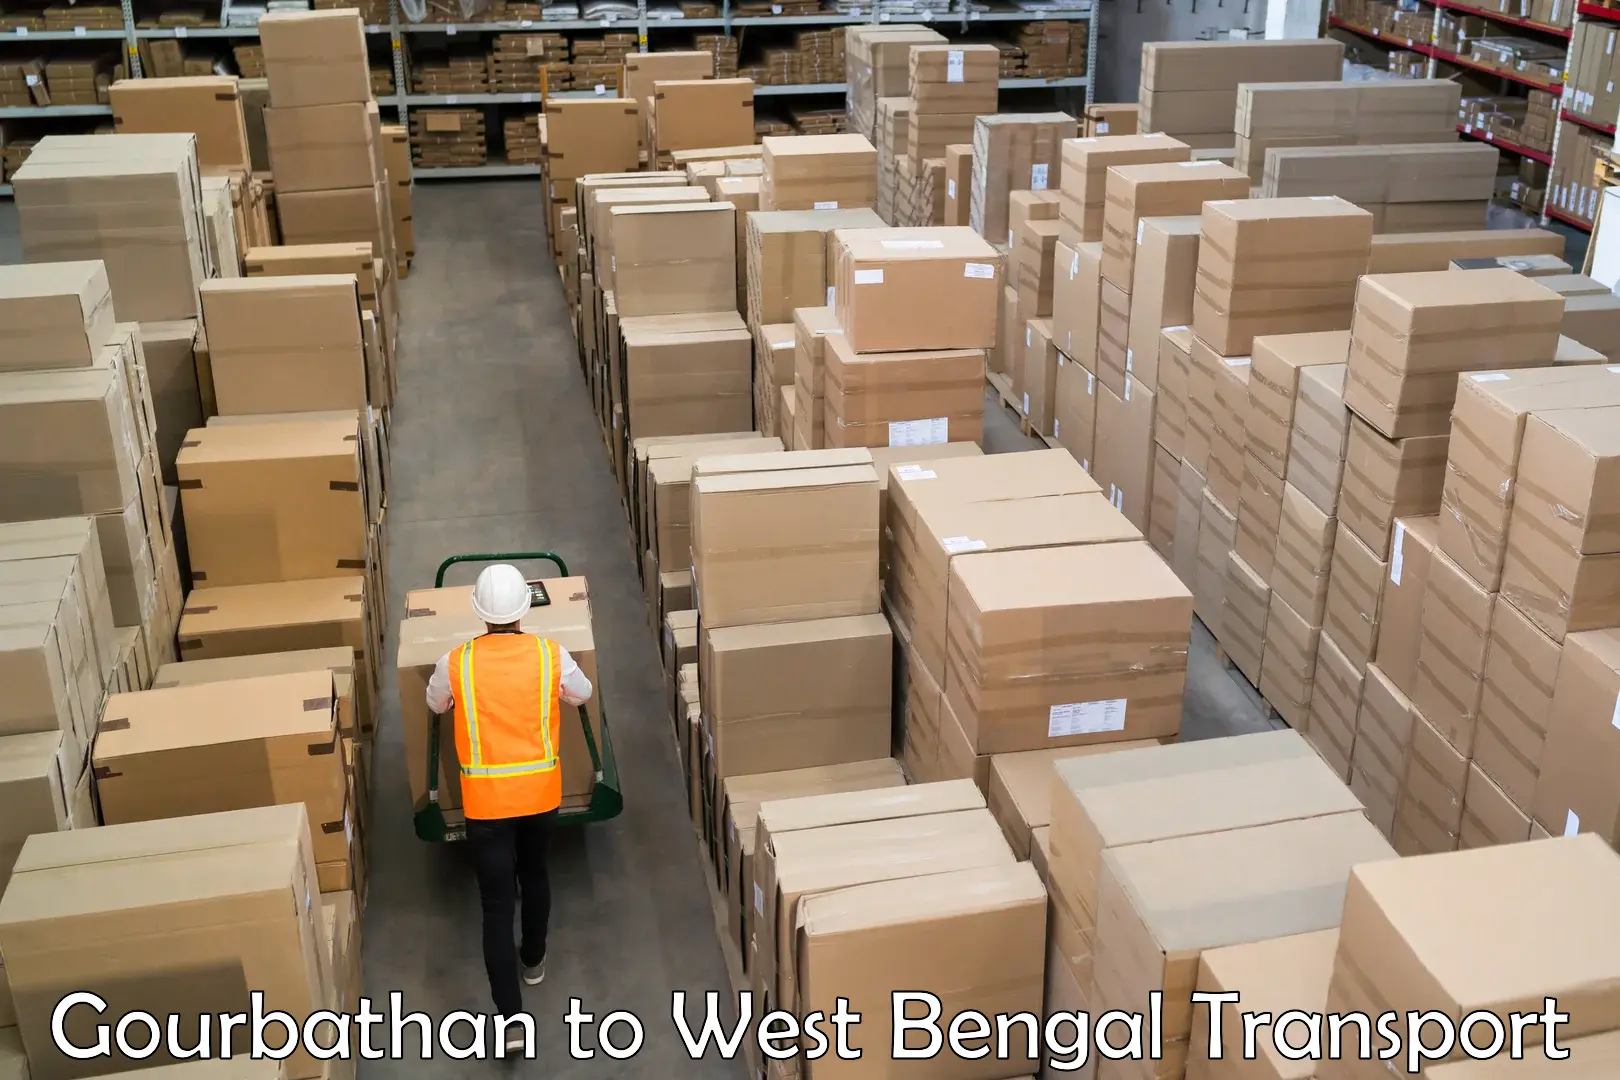 Air freight transport services Gourbathan to West Bengal